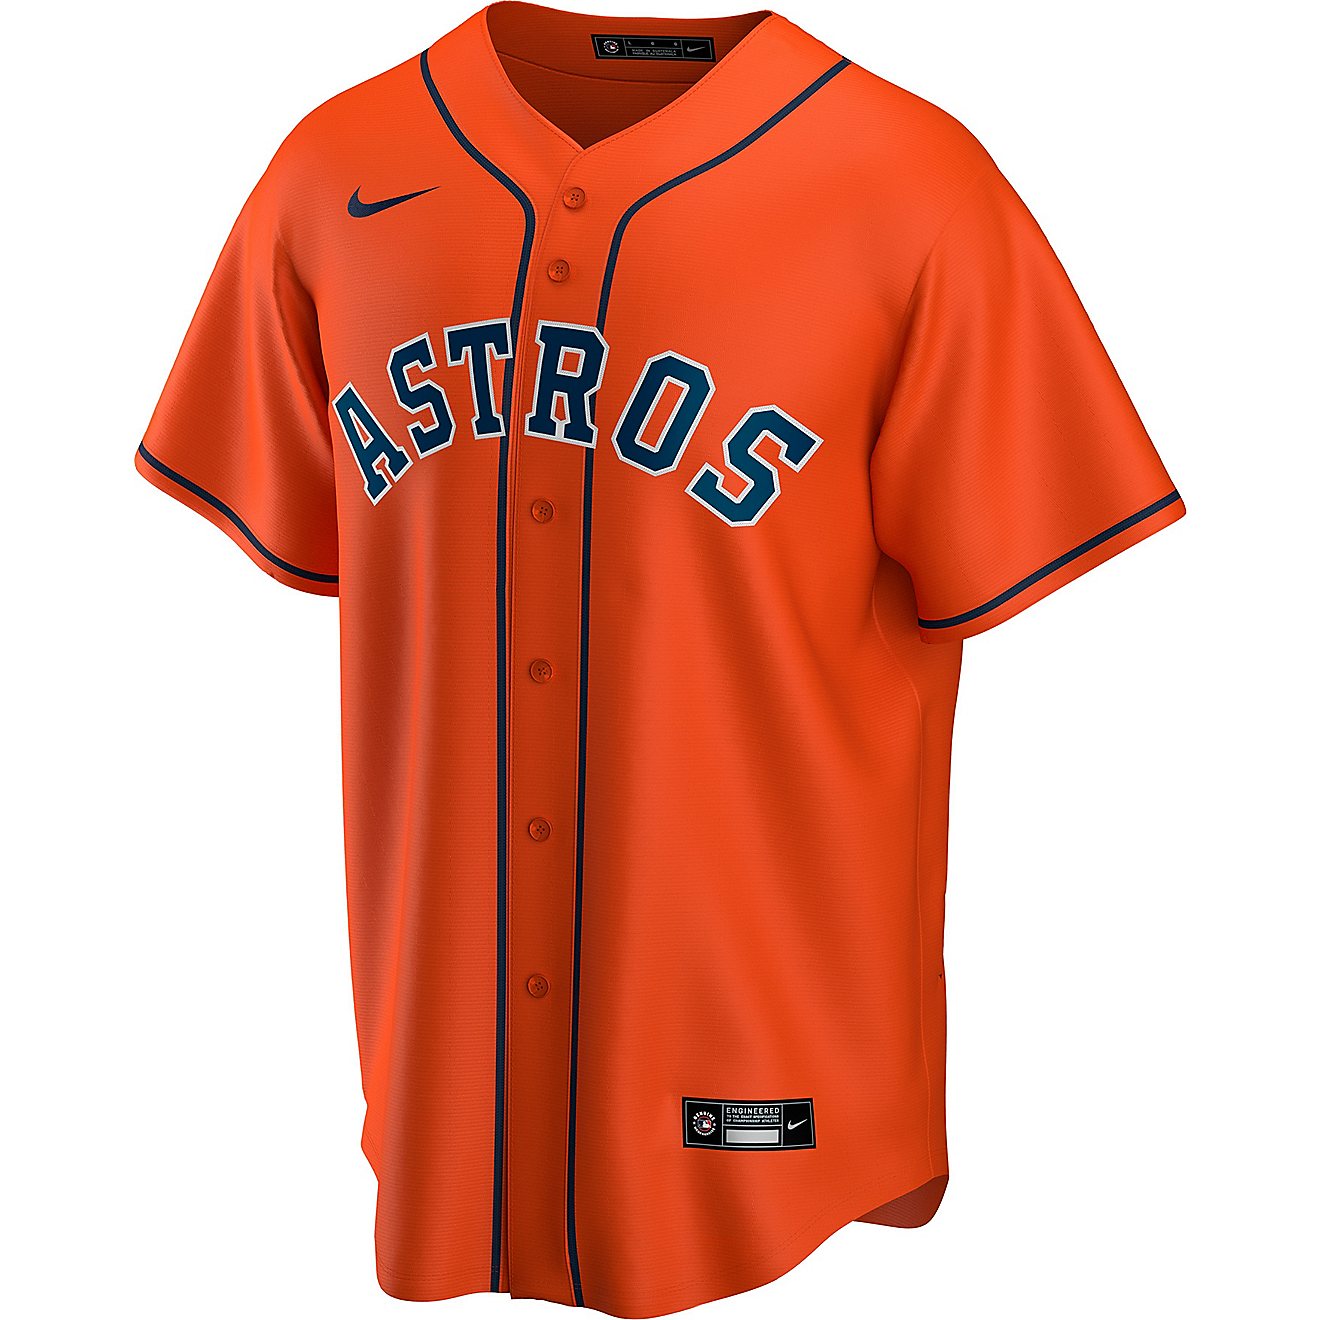 Nike Men's Houston Astros Official Player Replica Jersey                                                                         - view number 1